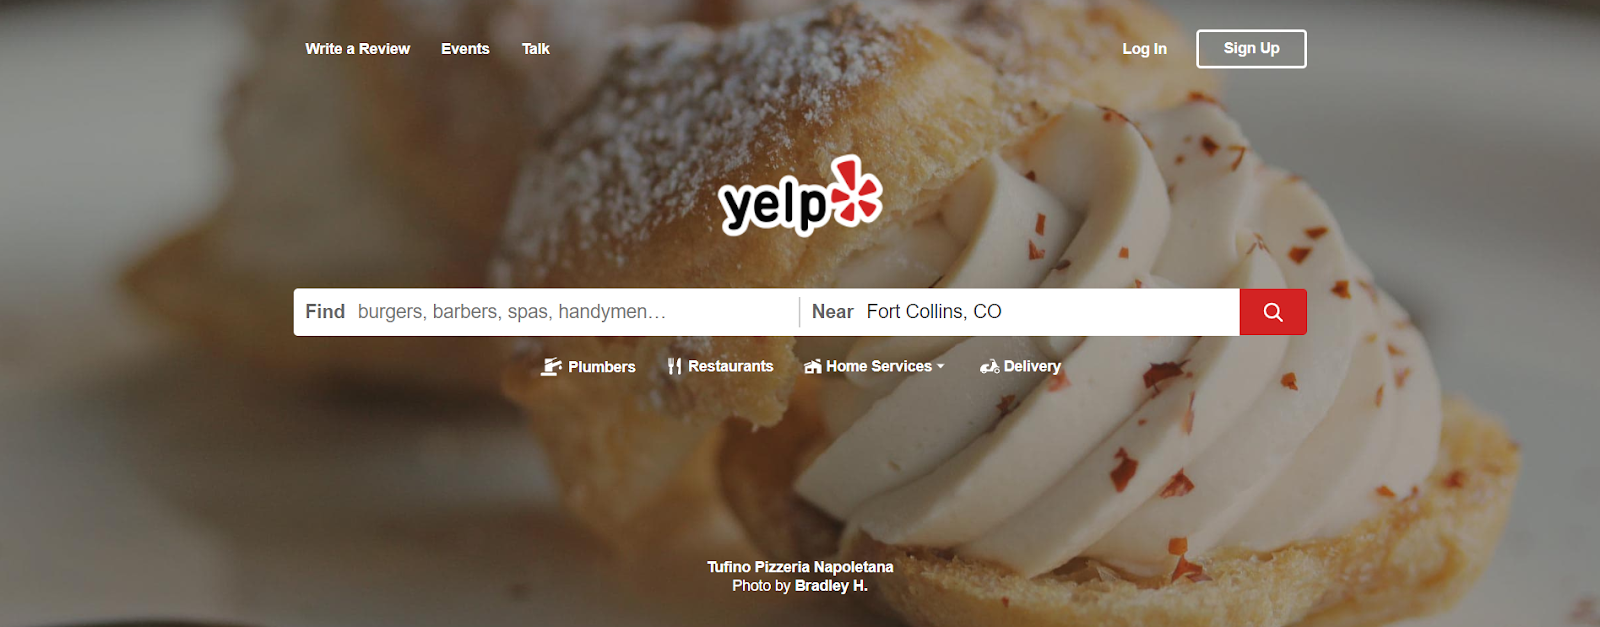 Yelp listing and review search page